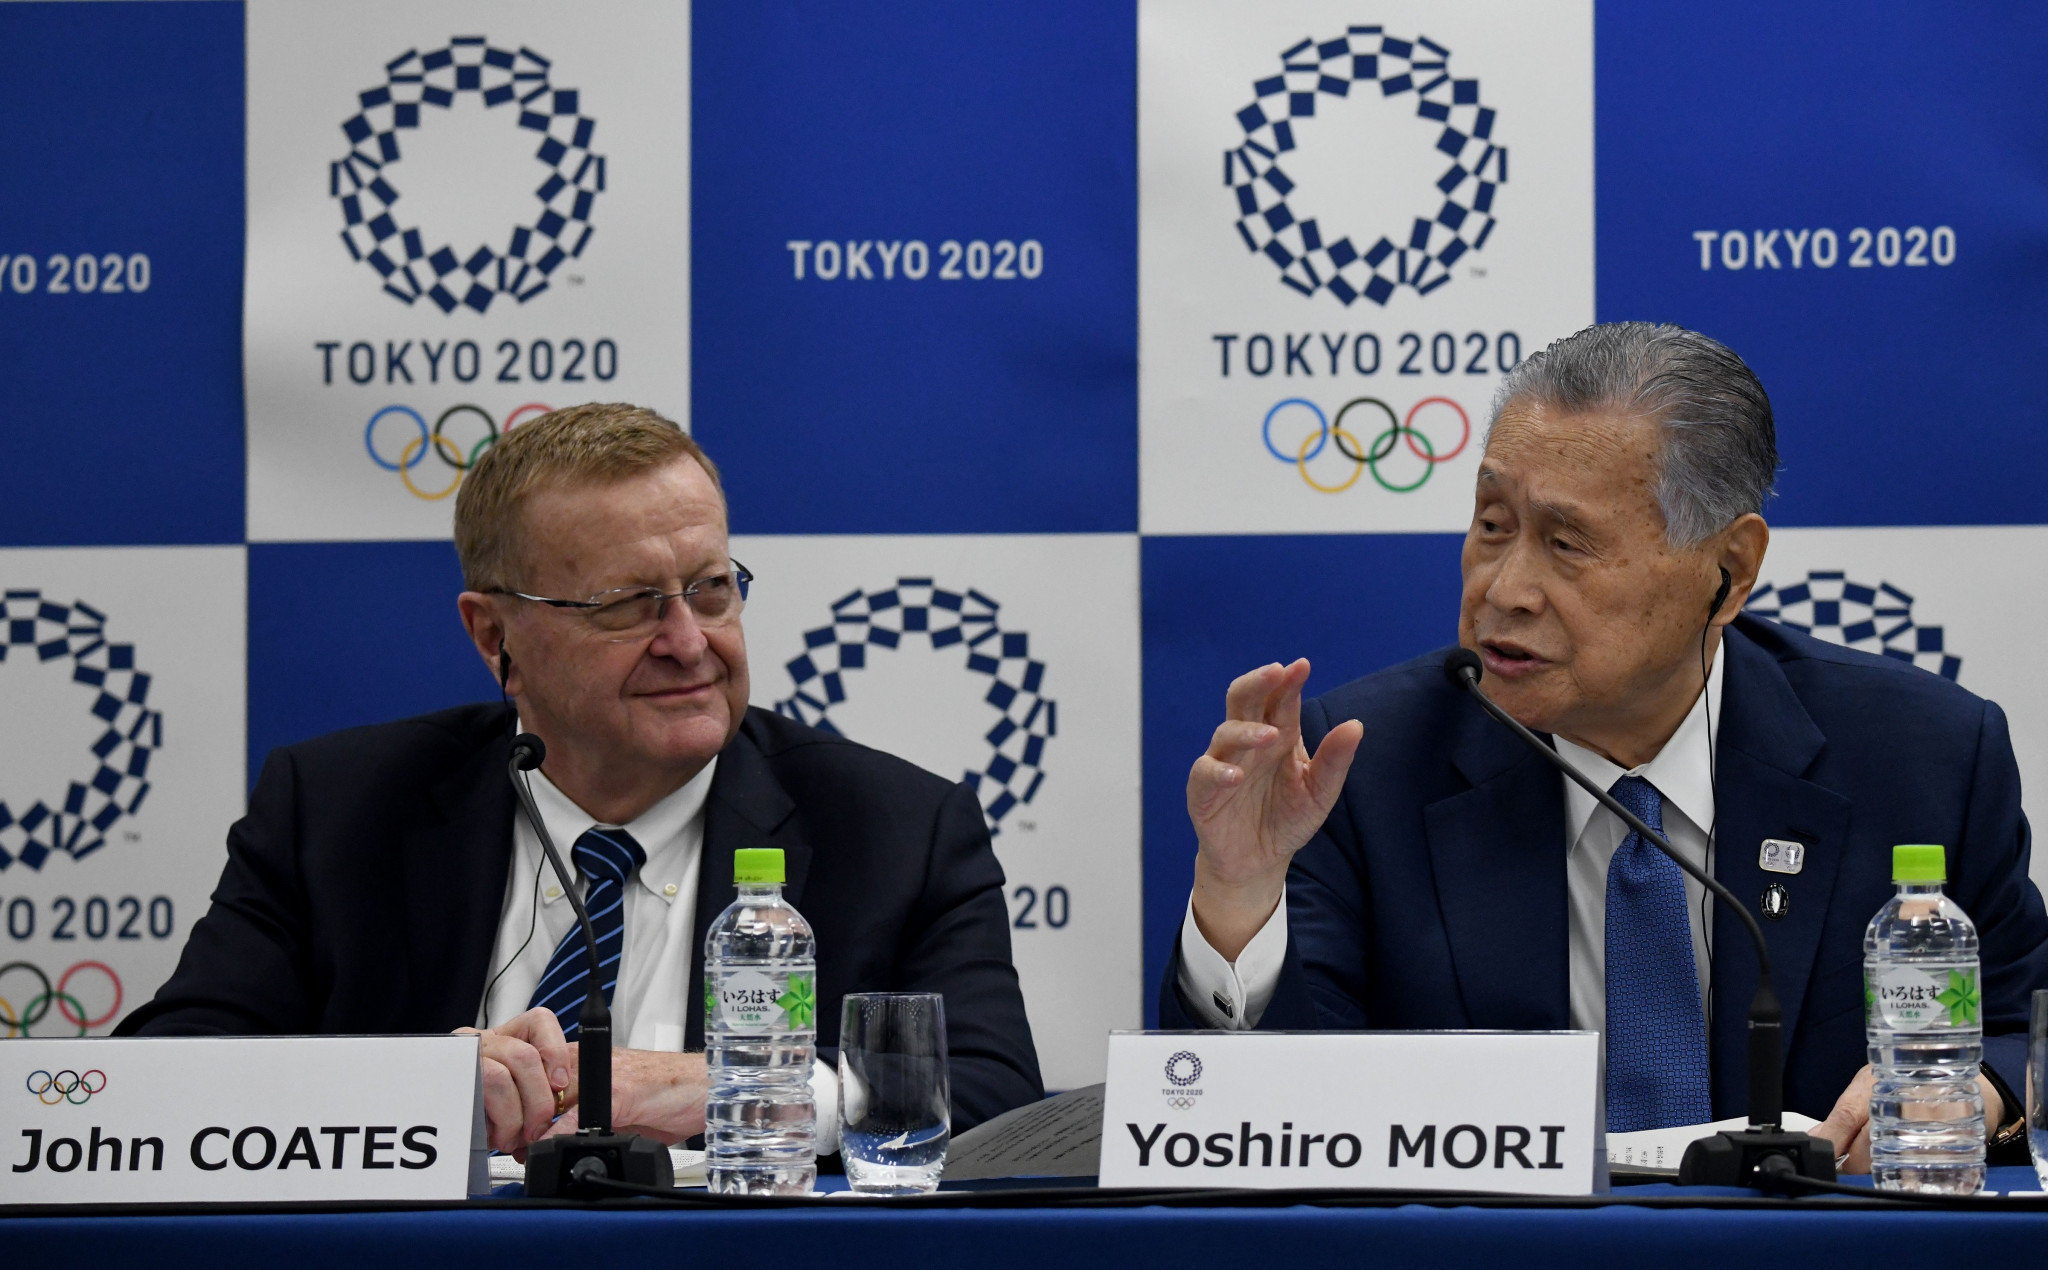 IOC Coordination Commission head John Coates has repeatedly urged Tokyo 2020 to reduce costs ©Getty Images